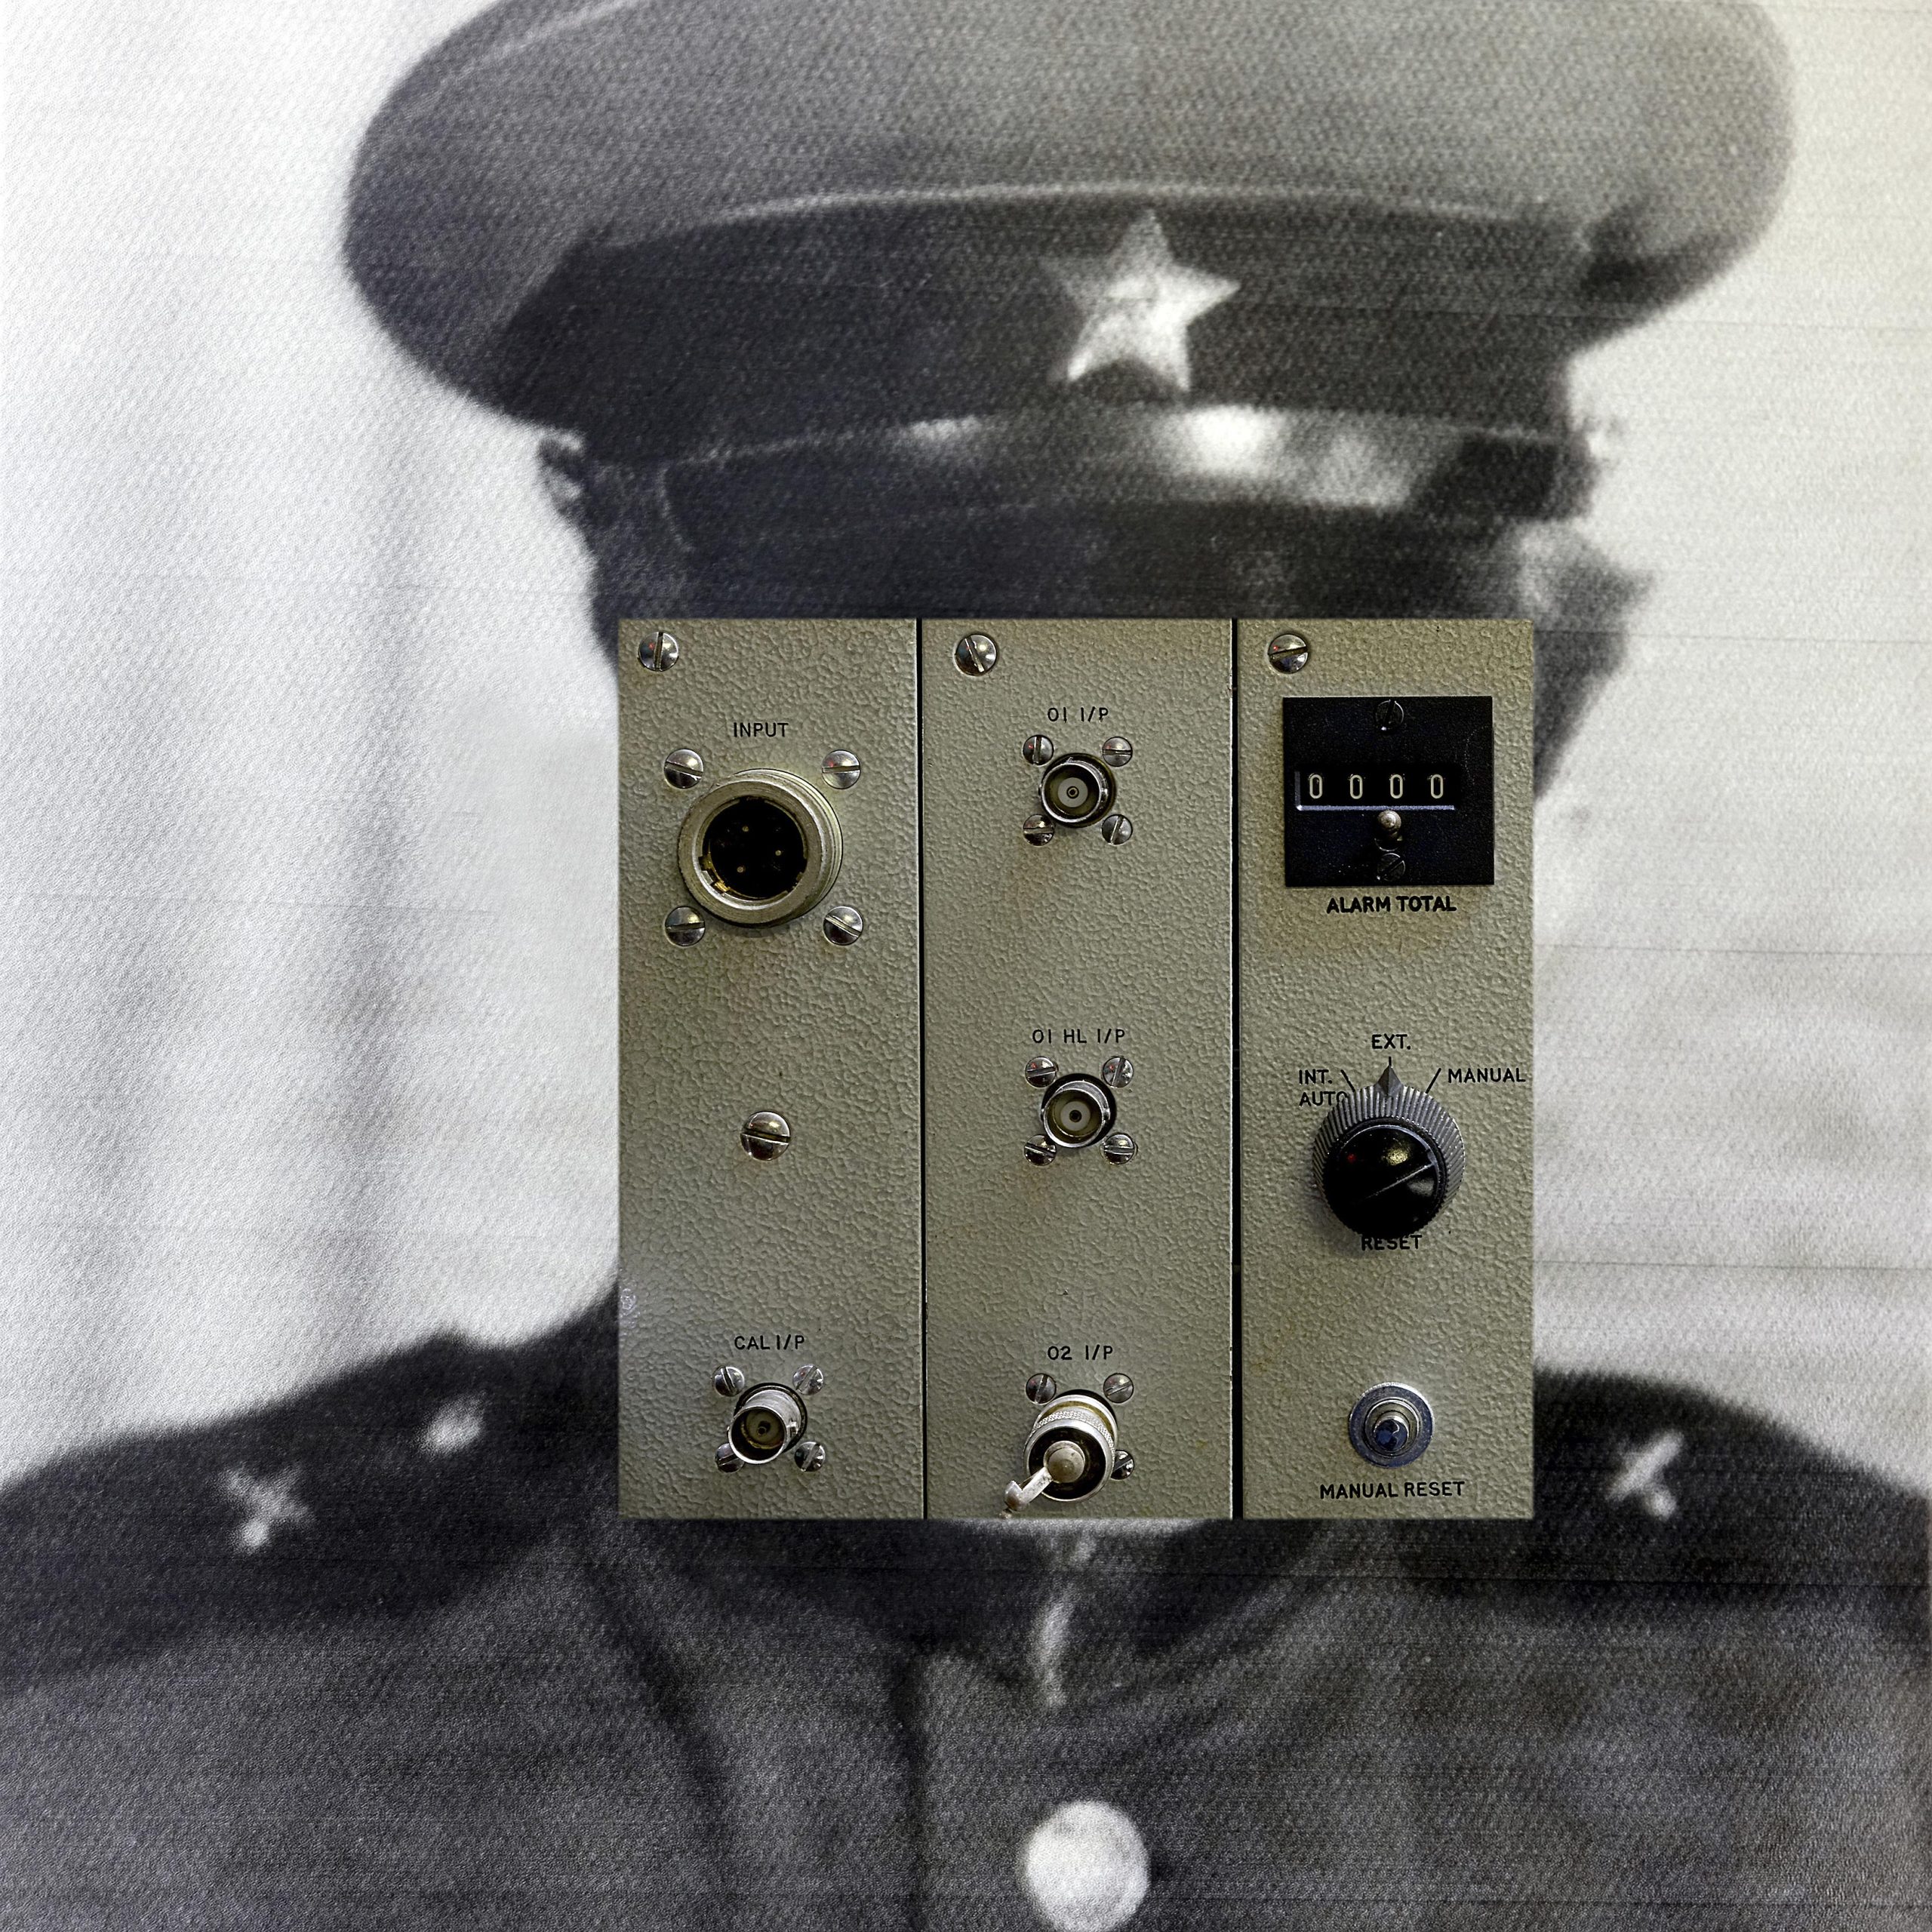 Photograph of a control panel on top of a black and white image of a soldier's head and shoulders